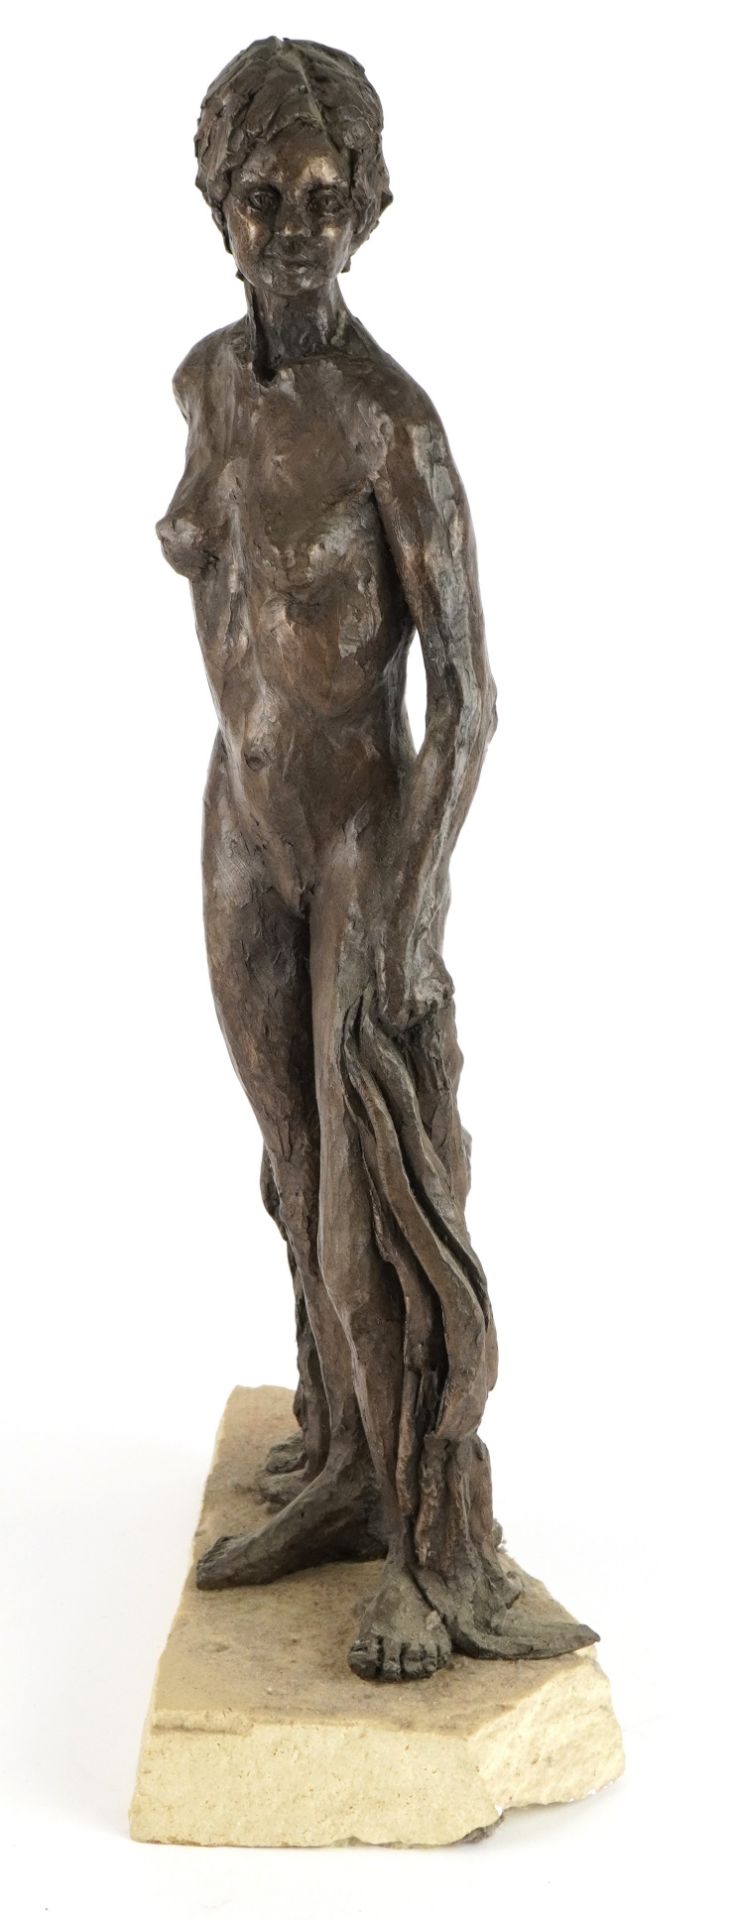 Manner of Neil Godfrey, Mid century style bronzed sculpture of a nude standing female on